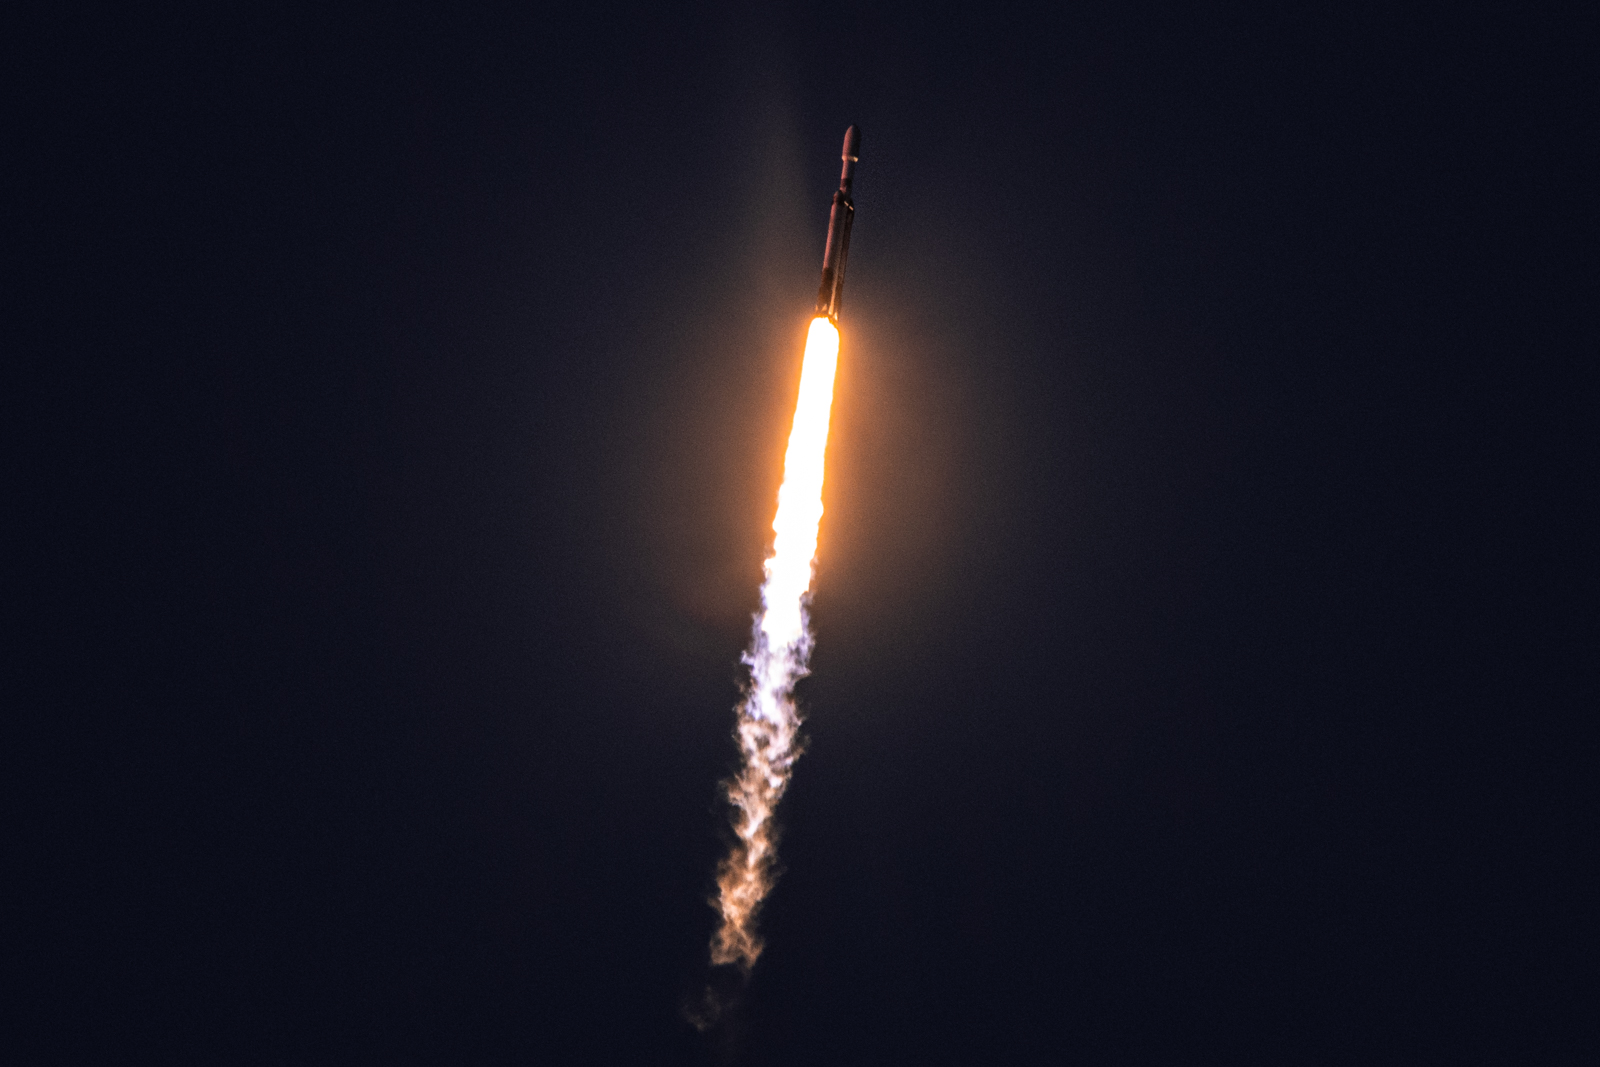 From start to finish, Sunday’s Falcon Heavy launch delivered spectacular imagery